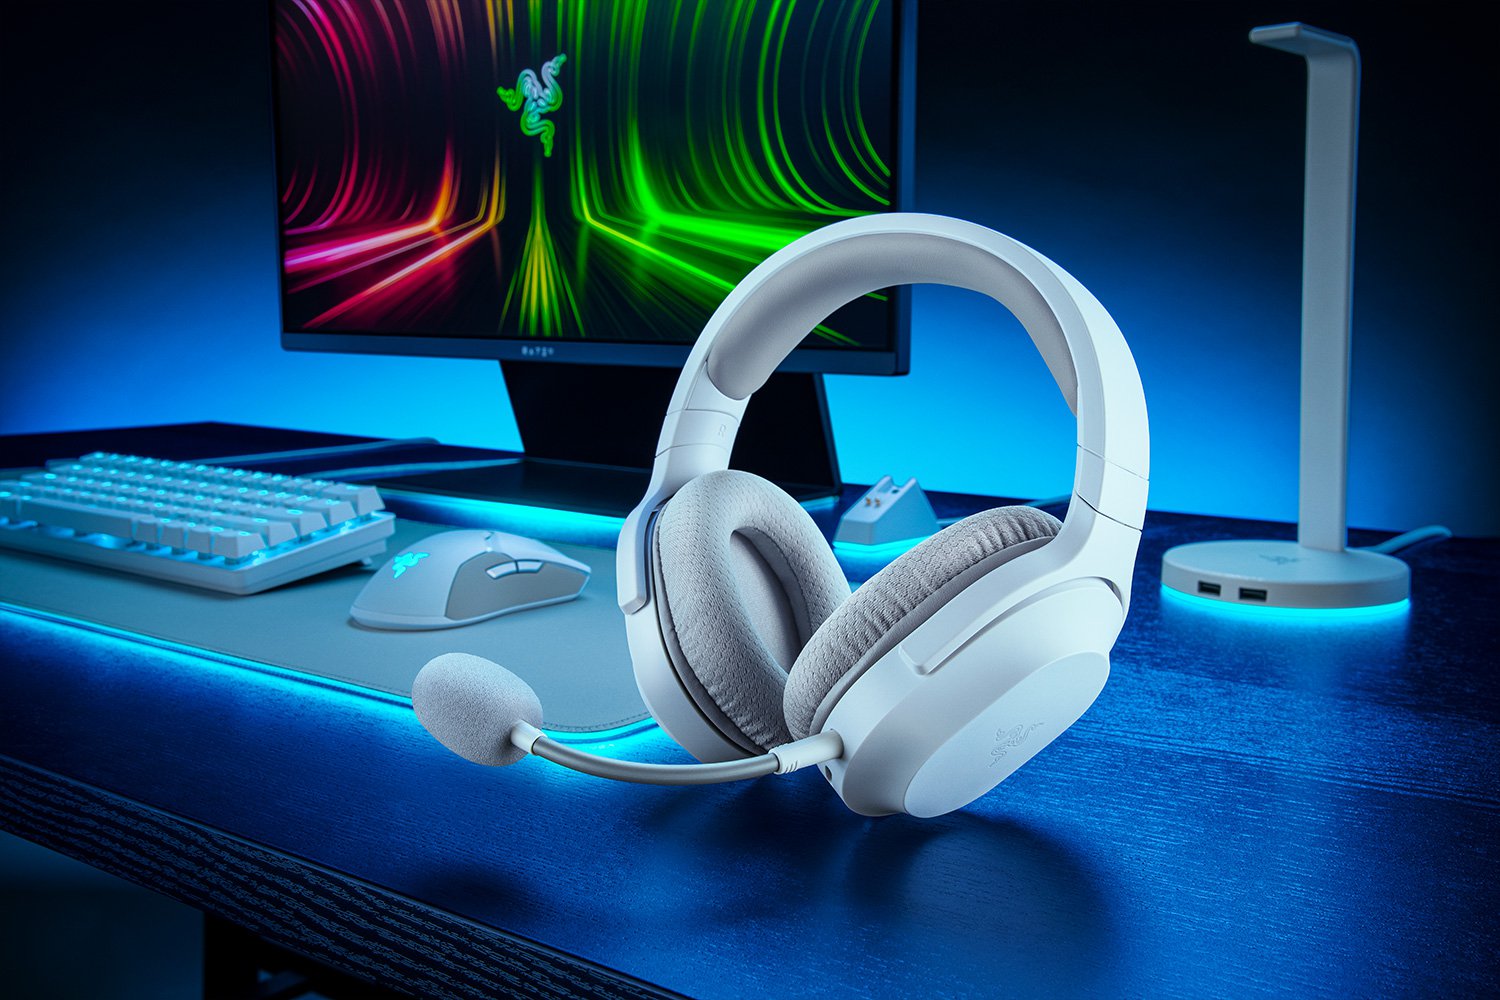 Razer Barracuda X Review: Wireless Multi-platform Gaming and Mobile Headset